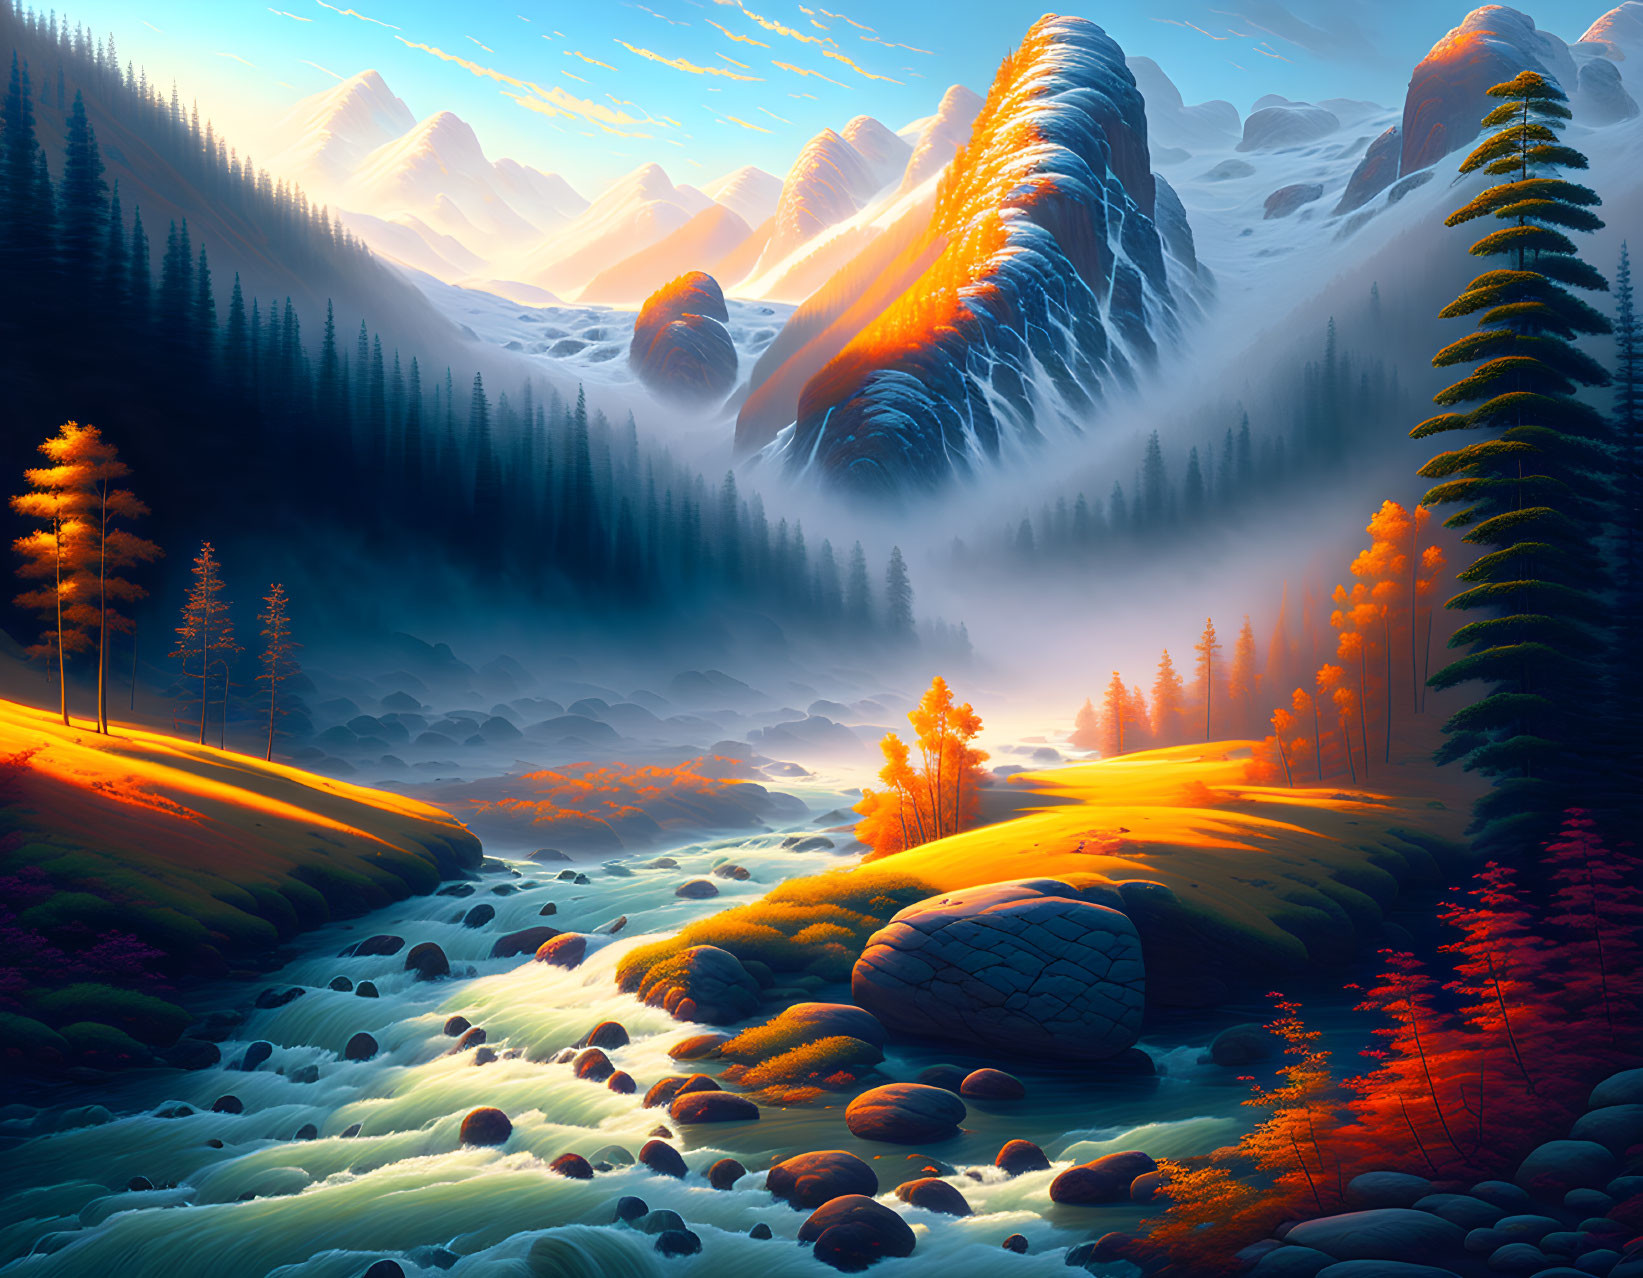 Misty mountainous landscape at sunrise with river and forest in warm light